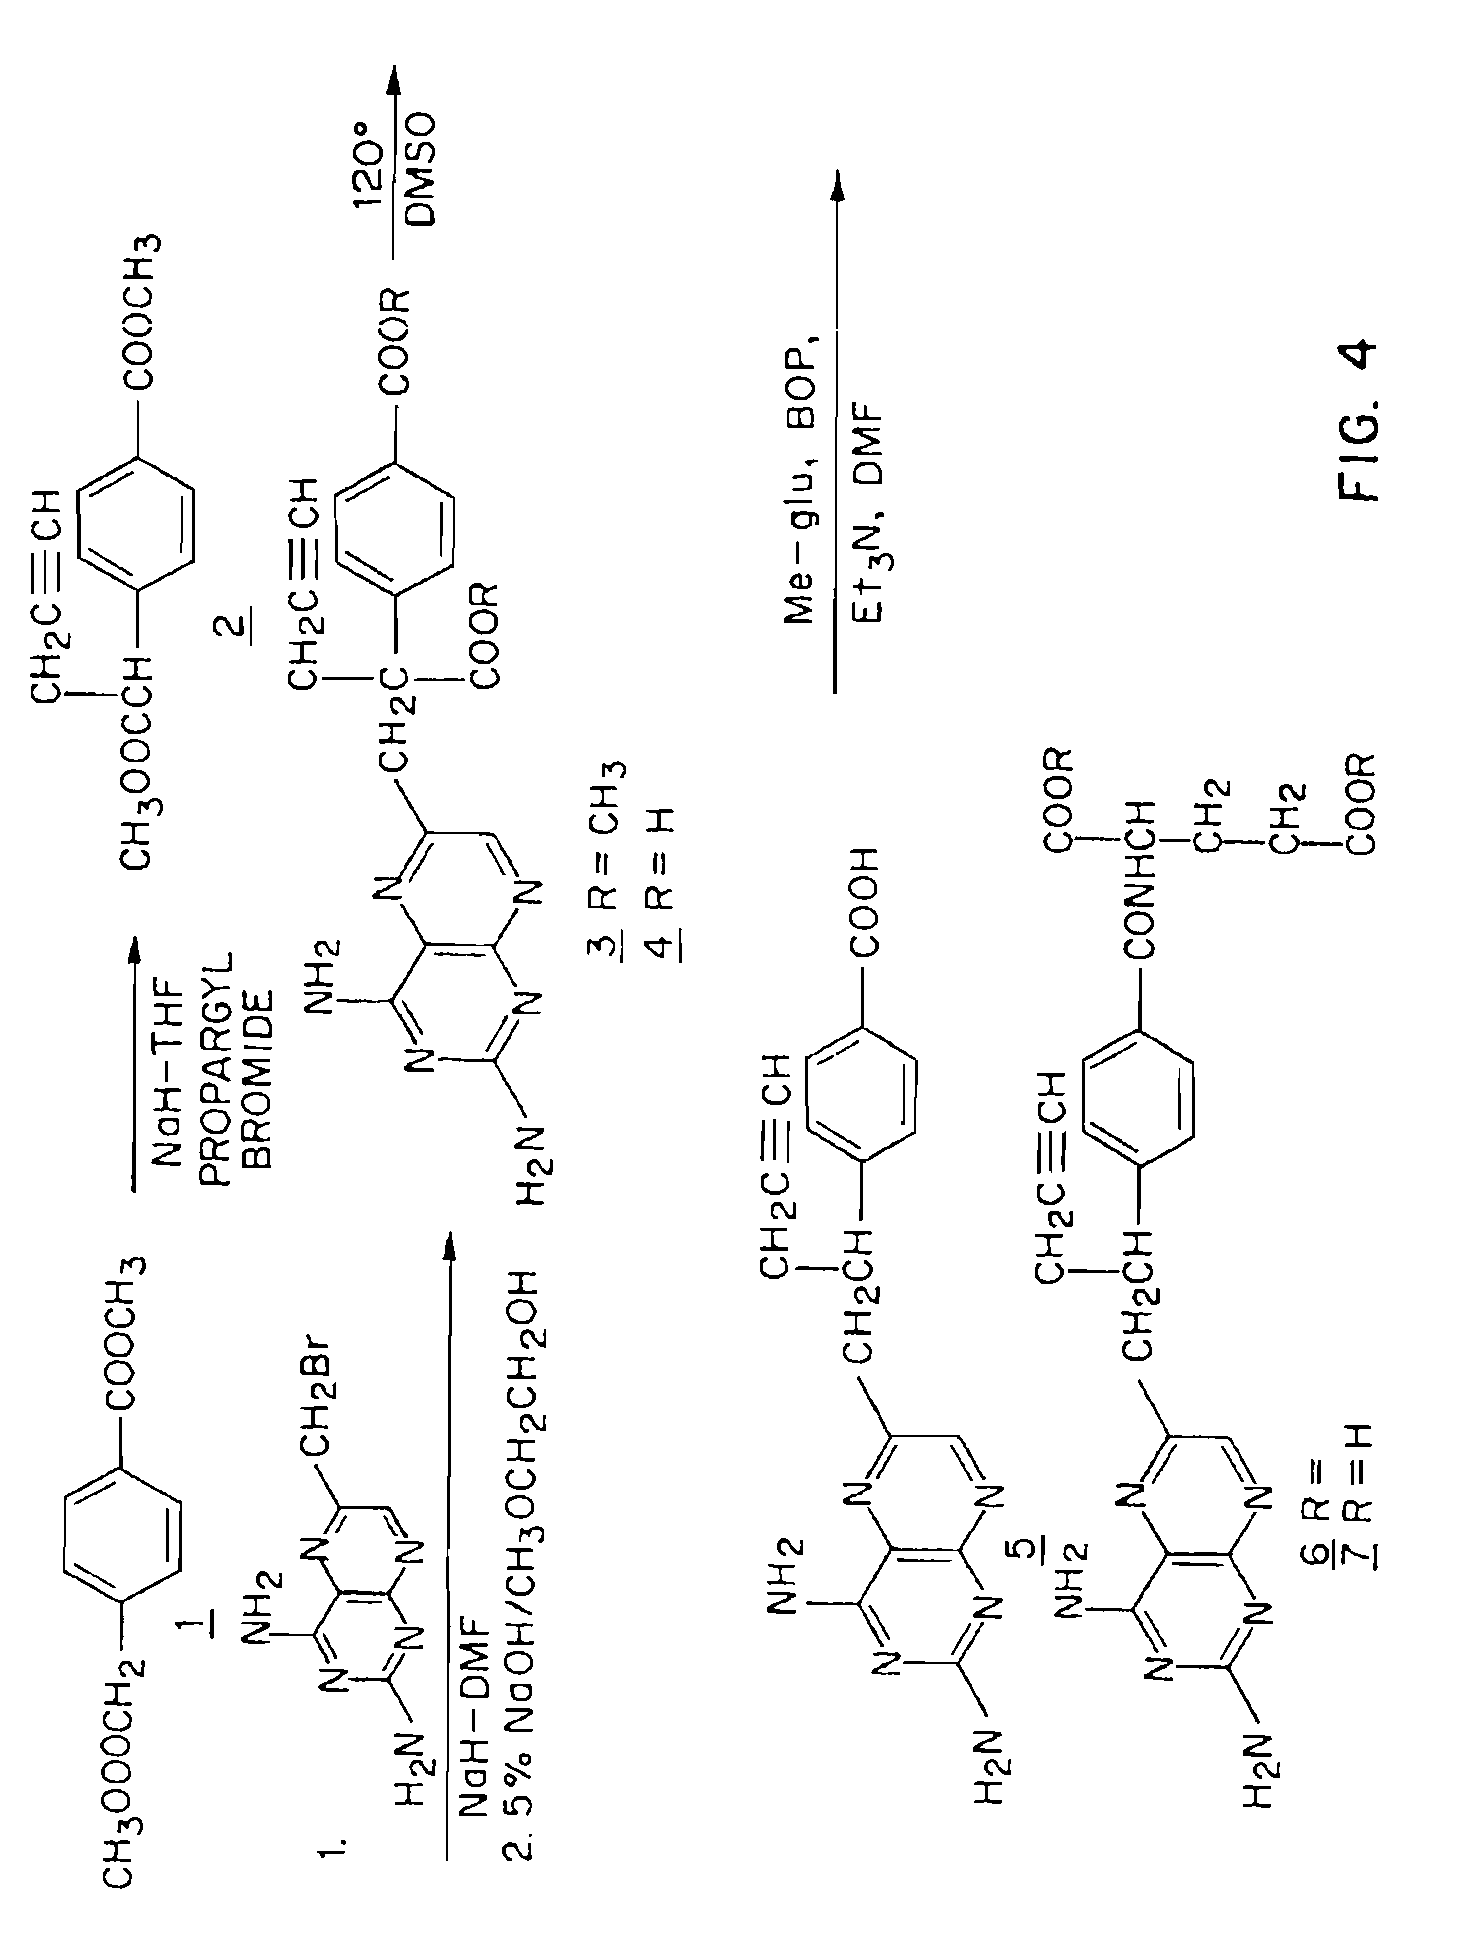 Methods to Treat Cancer with 10-propargyl-10-deazaaminopterin and Methods for Assessing Cancer for Increased Sensitivity to 10-propargyl-10-deazaaminopterin